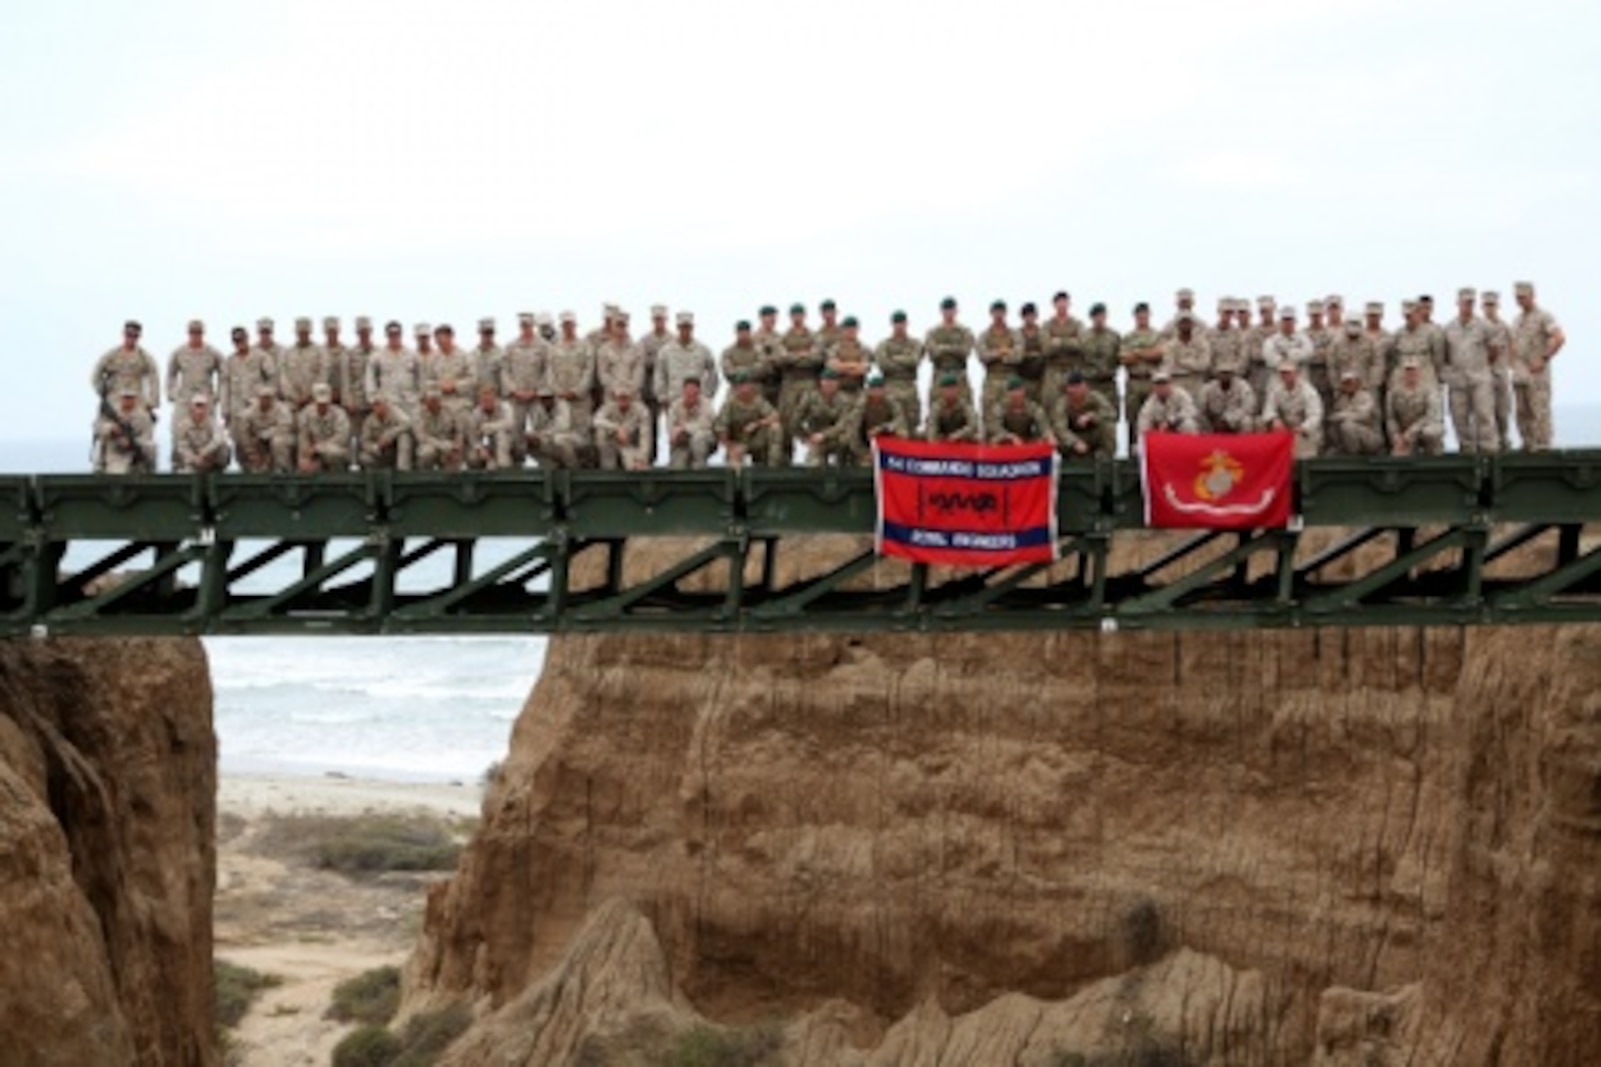 Engineers from Bridge Company, 7th Engineer Support Battalion, 1st Marine Logistics Group and 1st Combat Engineer Battalion, 1st Marine Division as well as members of British 54 Commando Squadron Royal Engineers stand atop a medium girder bridge they built aboard Camp Pendleton, Calif., Sept. 21, 2015. Marines from 7th ESB and 1st CEB are conducting various engineer training events alongside their British counterparts in coming weeks as part of annual large-scale exercise Black Alligator.